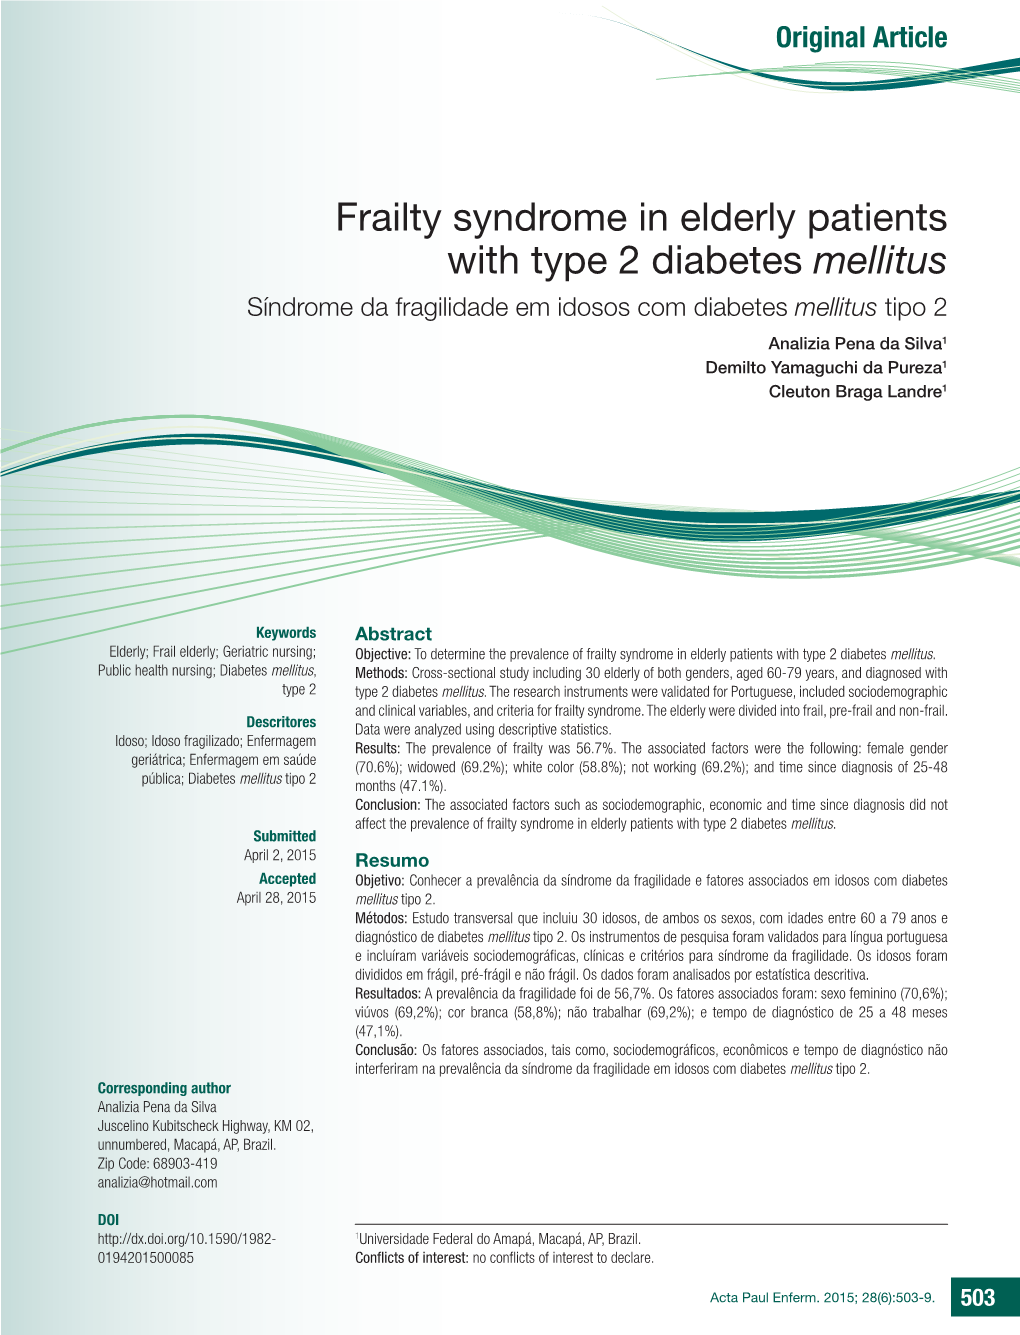 Frailty Syndrome in Elderly Patients with Type 2 Diabetes Mellitus